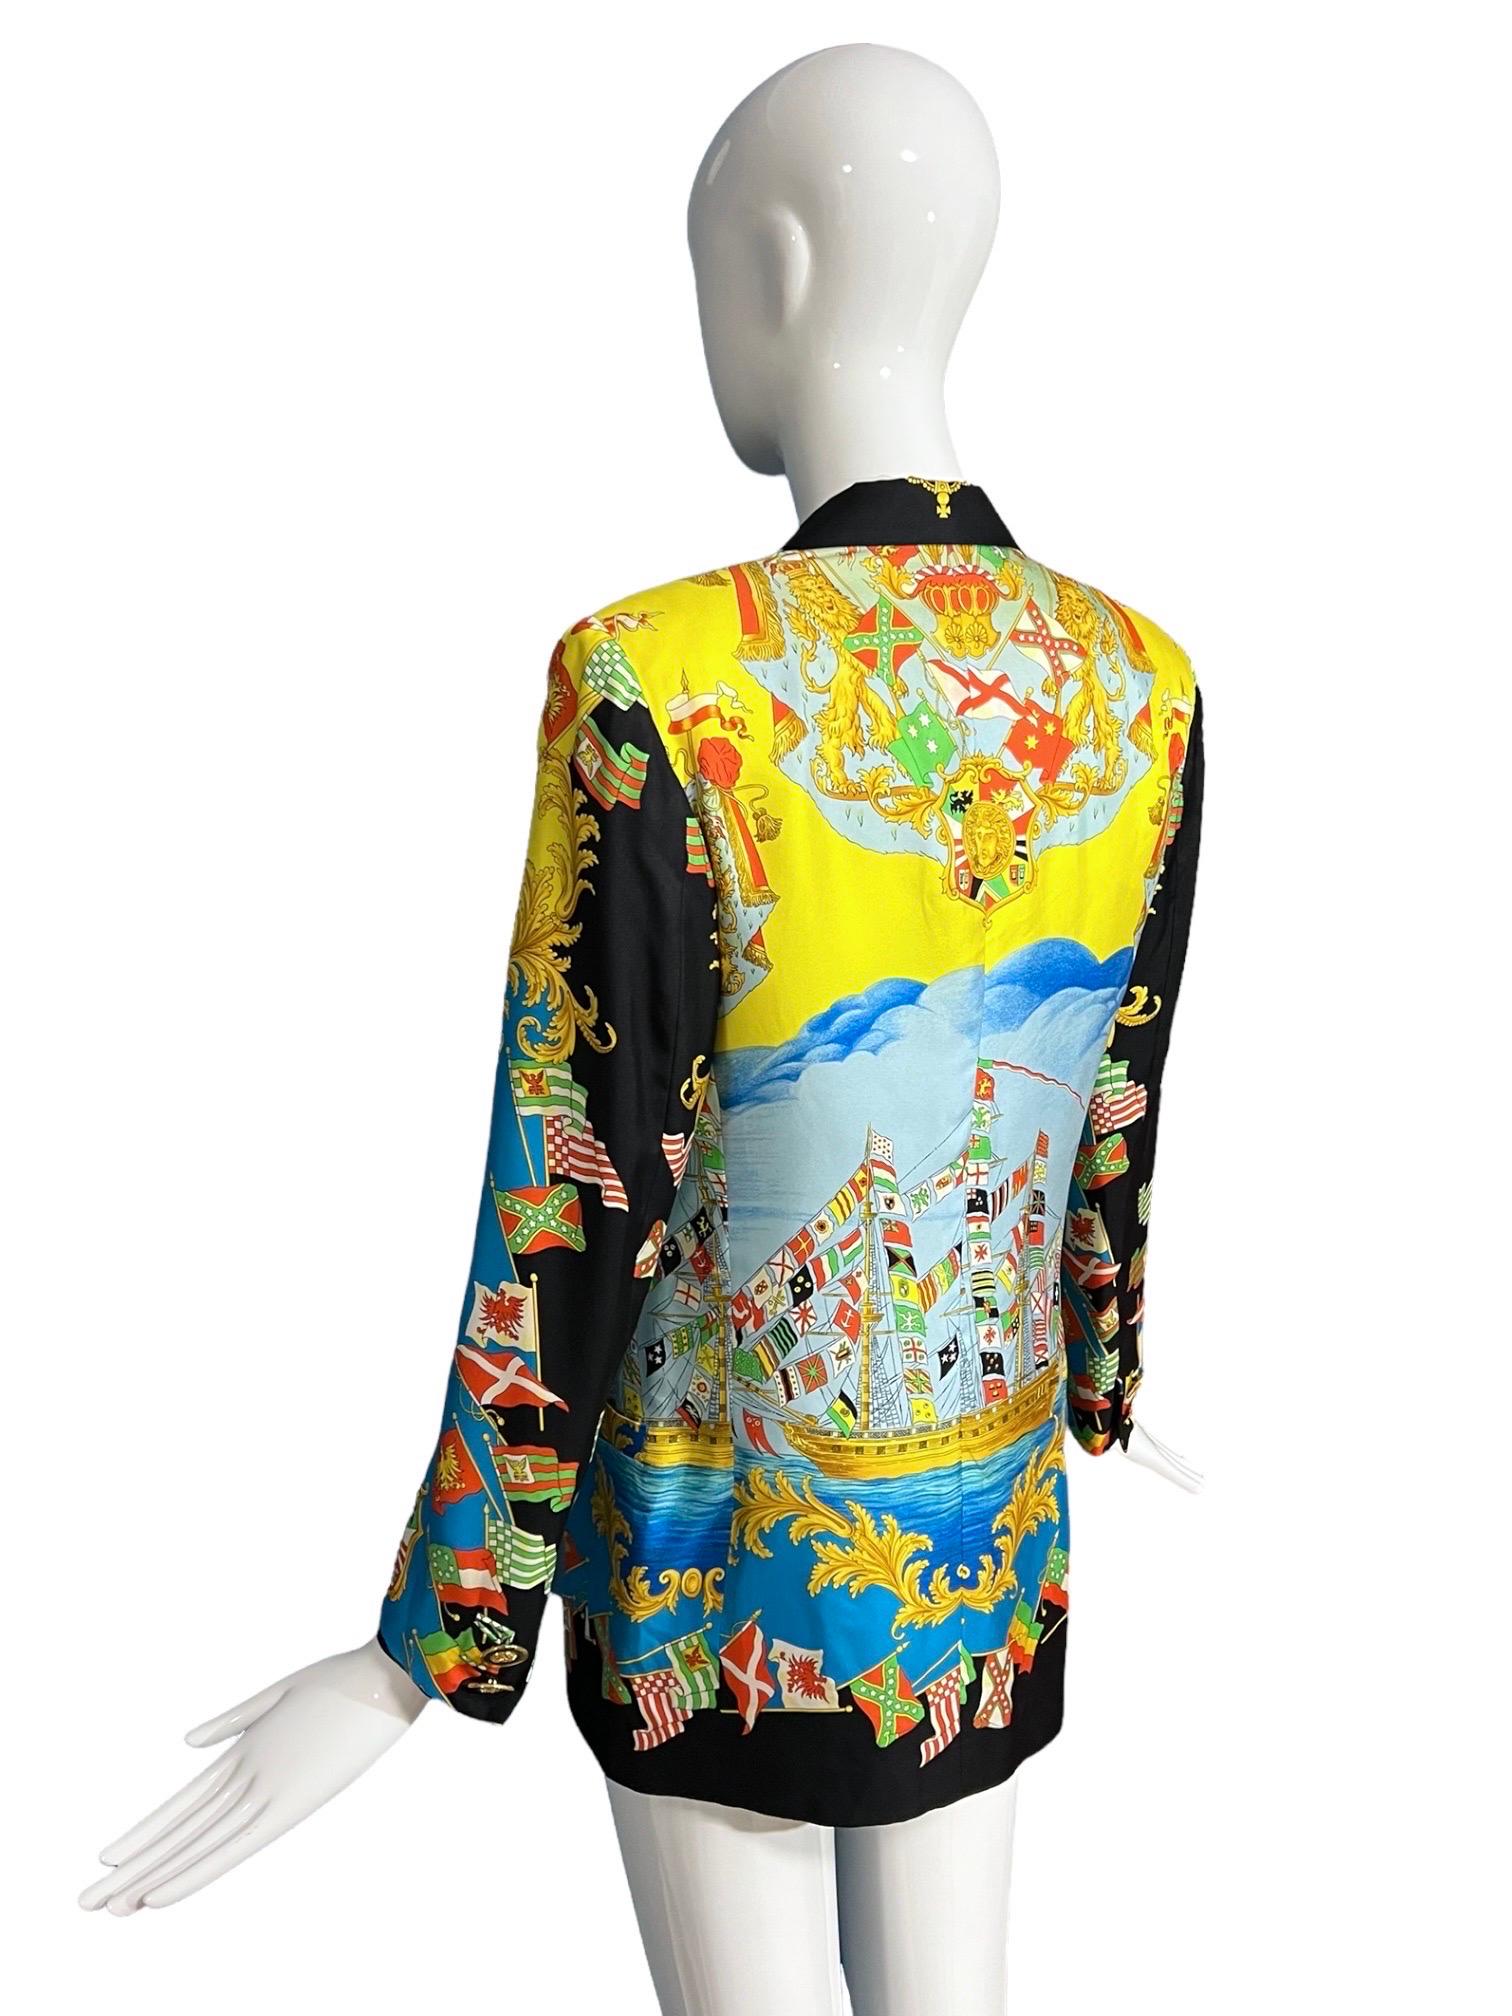 S/S 1993 Gianni Versace Baroque Flags Silk Blazer Jacket Miami Collection  For Sale 6